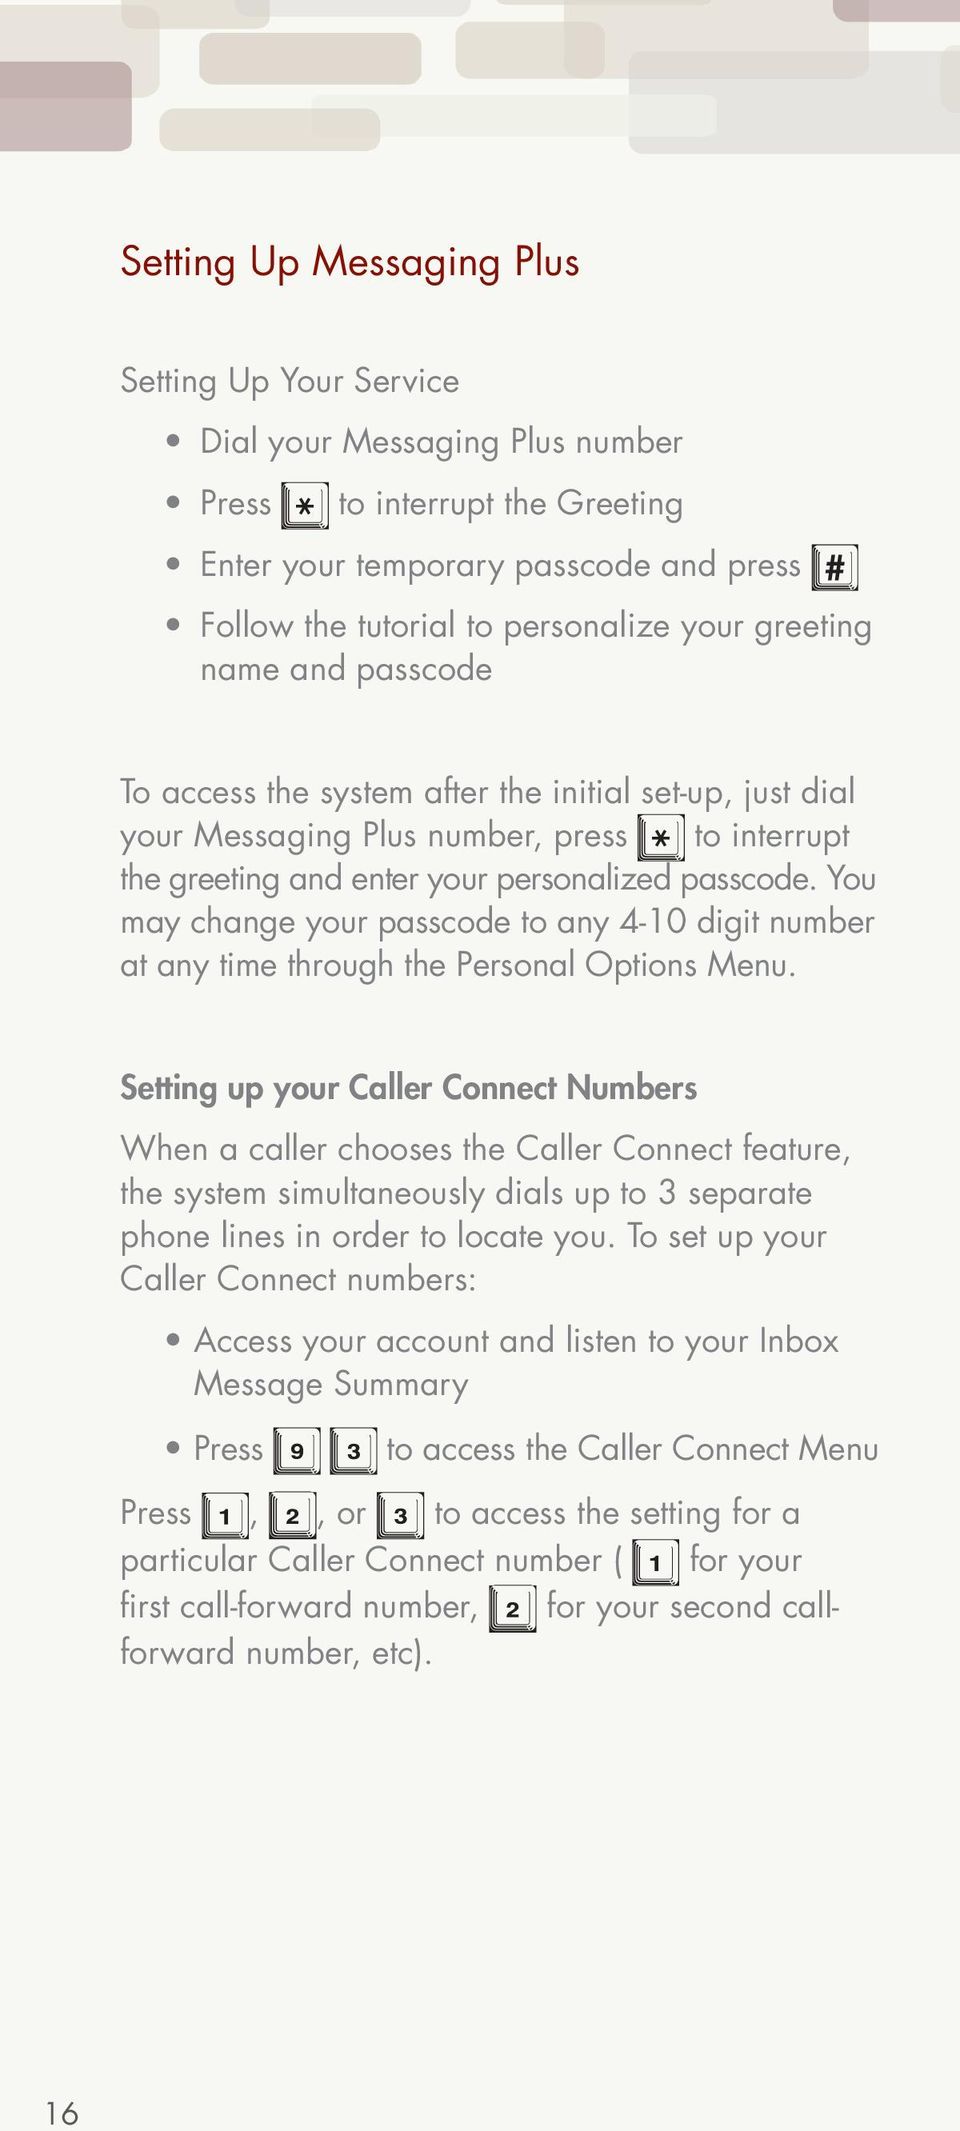 You may change your passcode to any 4-10 digit number at any time through the Personal Options Menu.